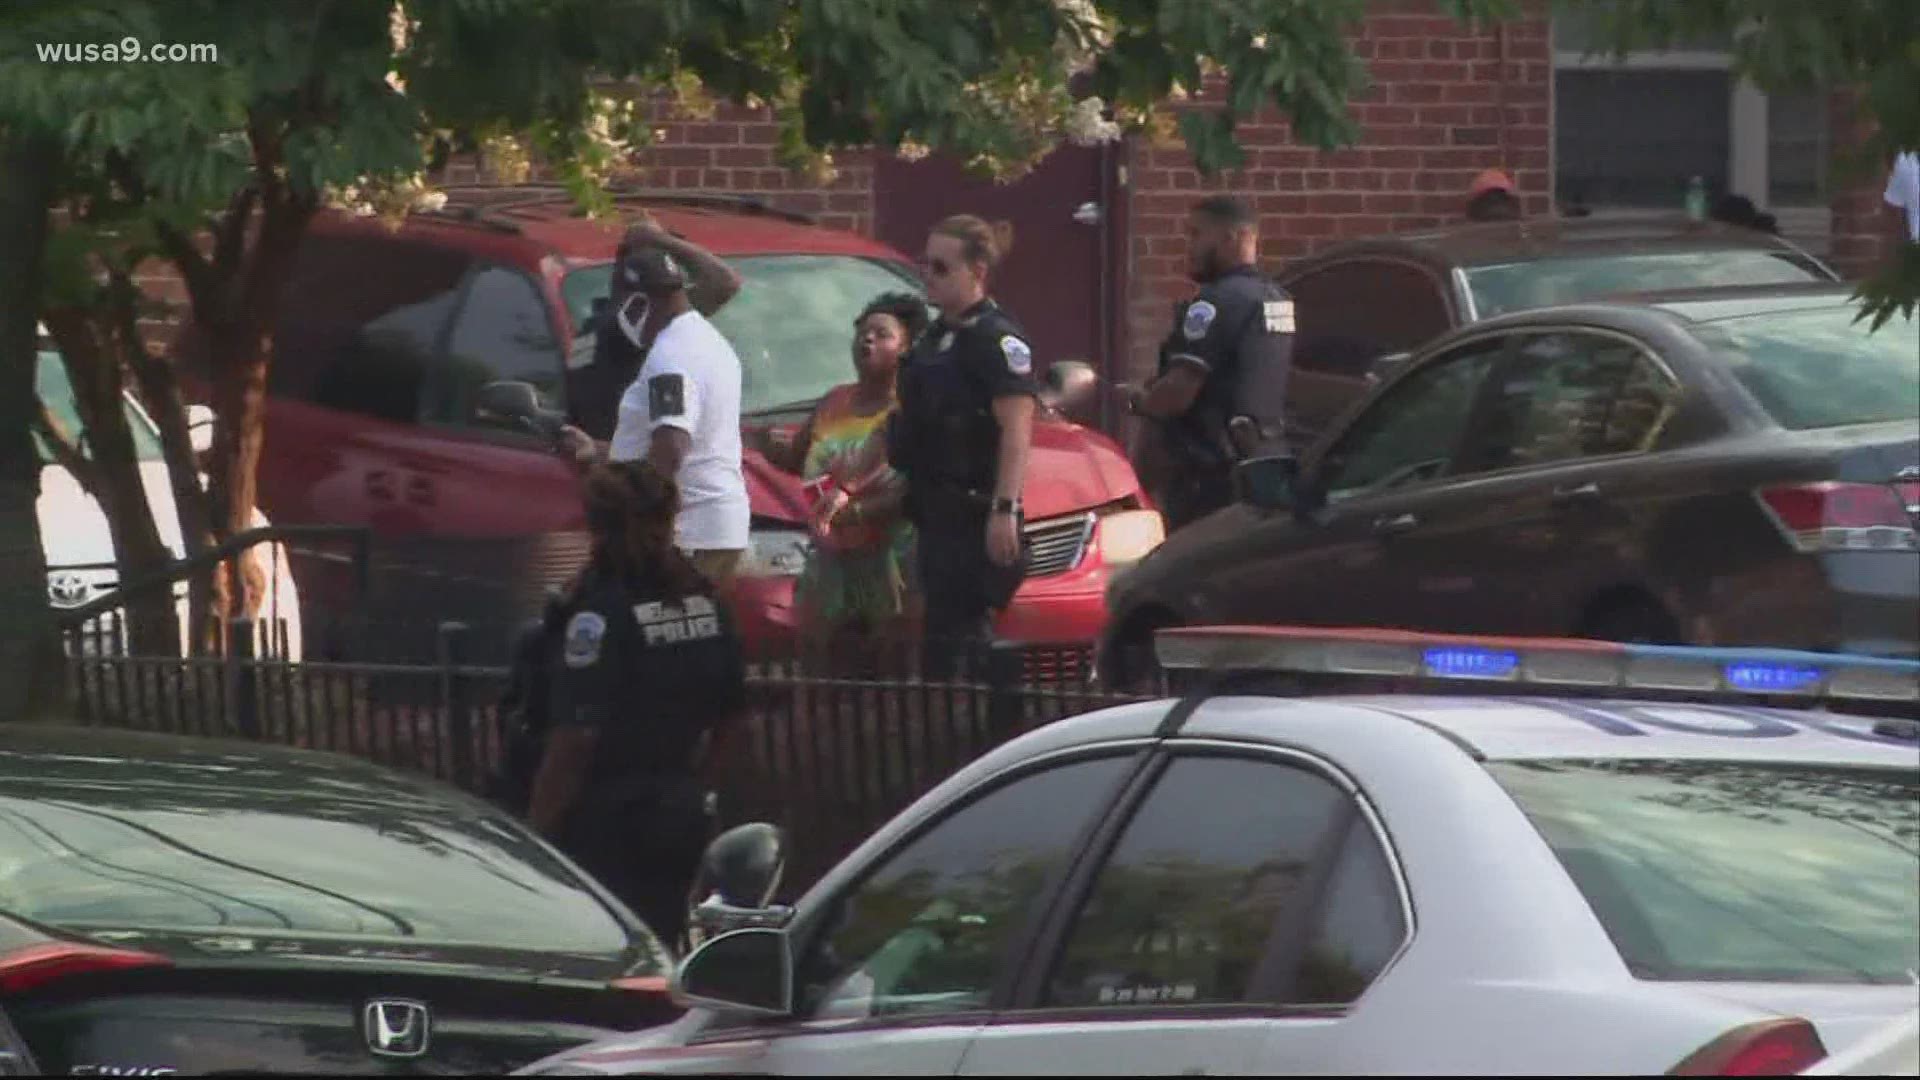 Four people were injured in a shooting in Southeast D.C. Wednesday afternoon, according to DC Police.